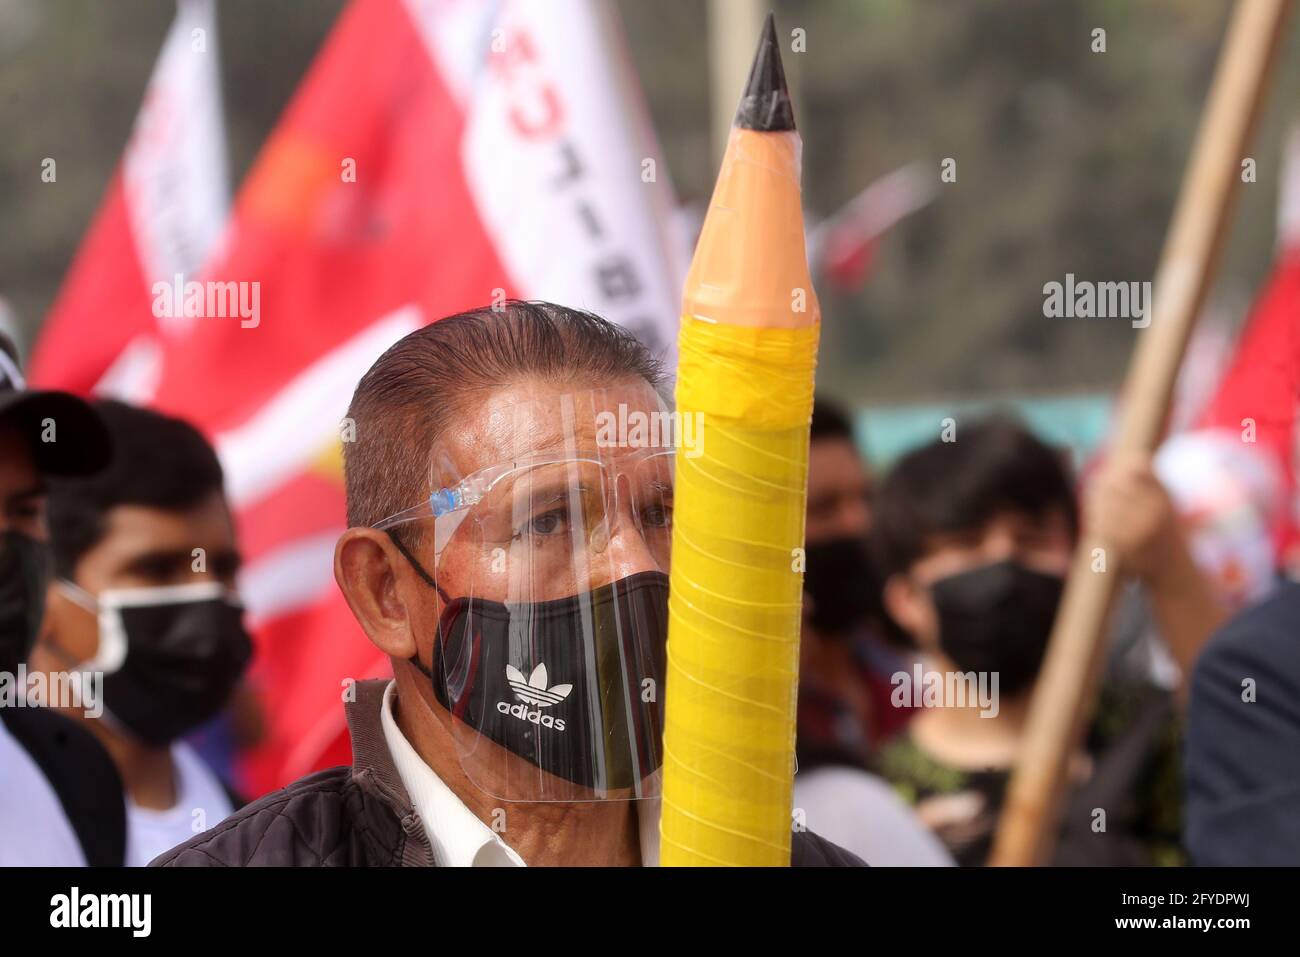 Lima, Peru. 26th May, 2021. A man holding a pencil, the symbol of the party, attends a campaign rally for Presidential candidate Pedro Castillo, in Villa El Salvador neighborhood. On June 6 Peruvians will go to the polls to elect new President between Castillo and Keiko Fujimori. Credit: Mariana Bazo/ZUMA Wire/Alamy Live News Stock Photo